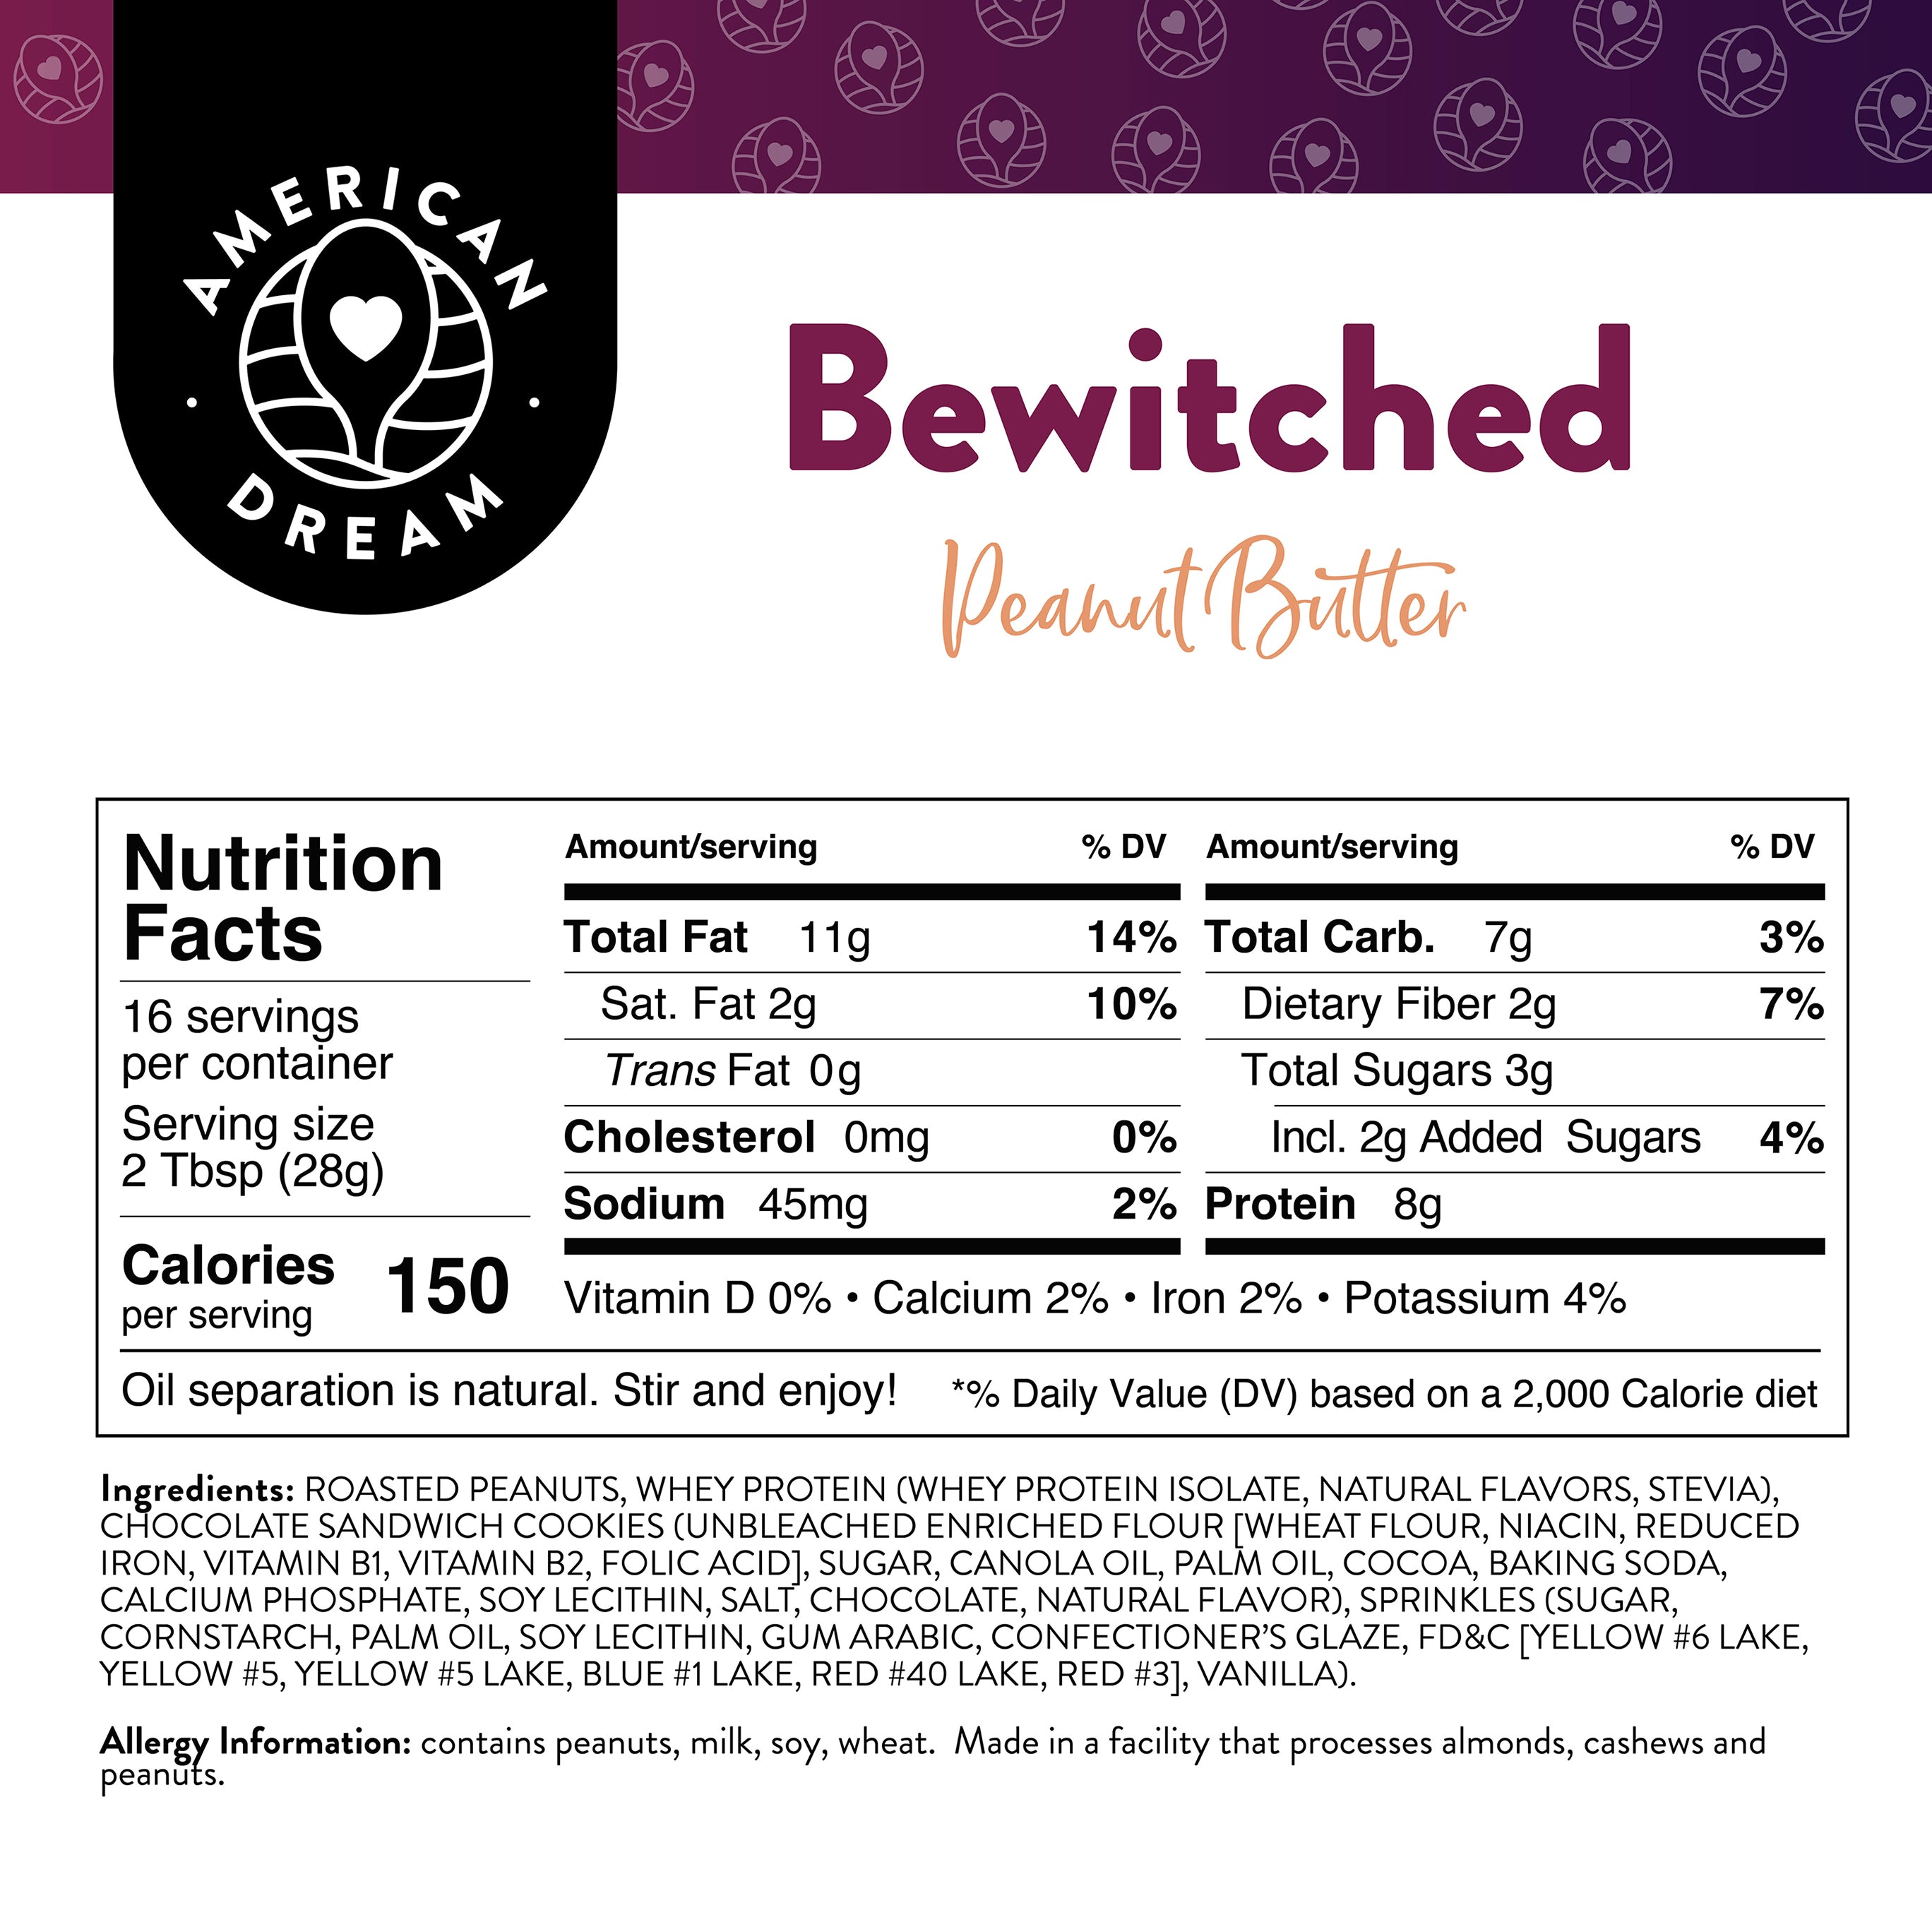 Bewitched Peanut Butter